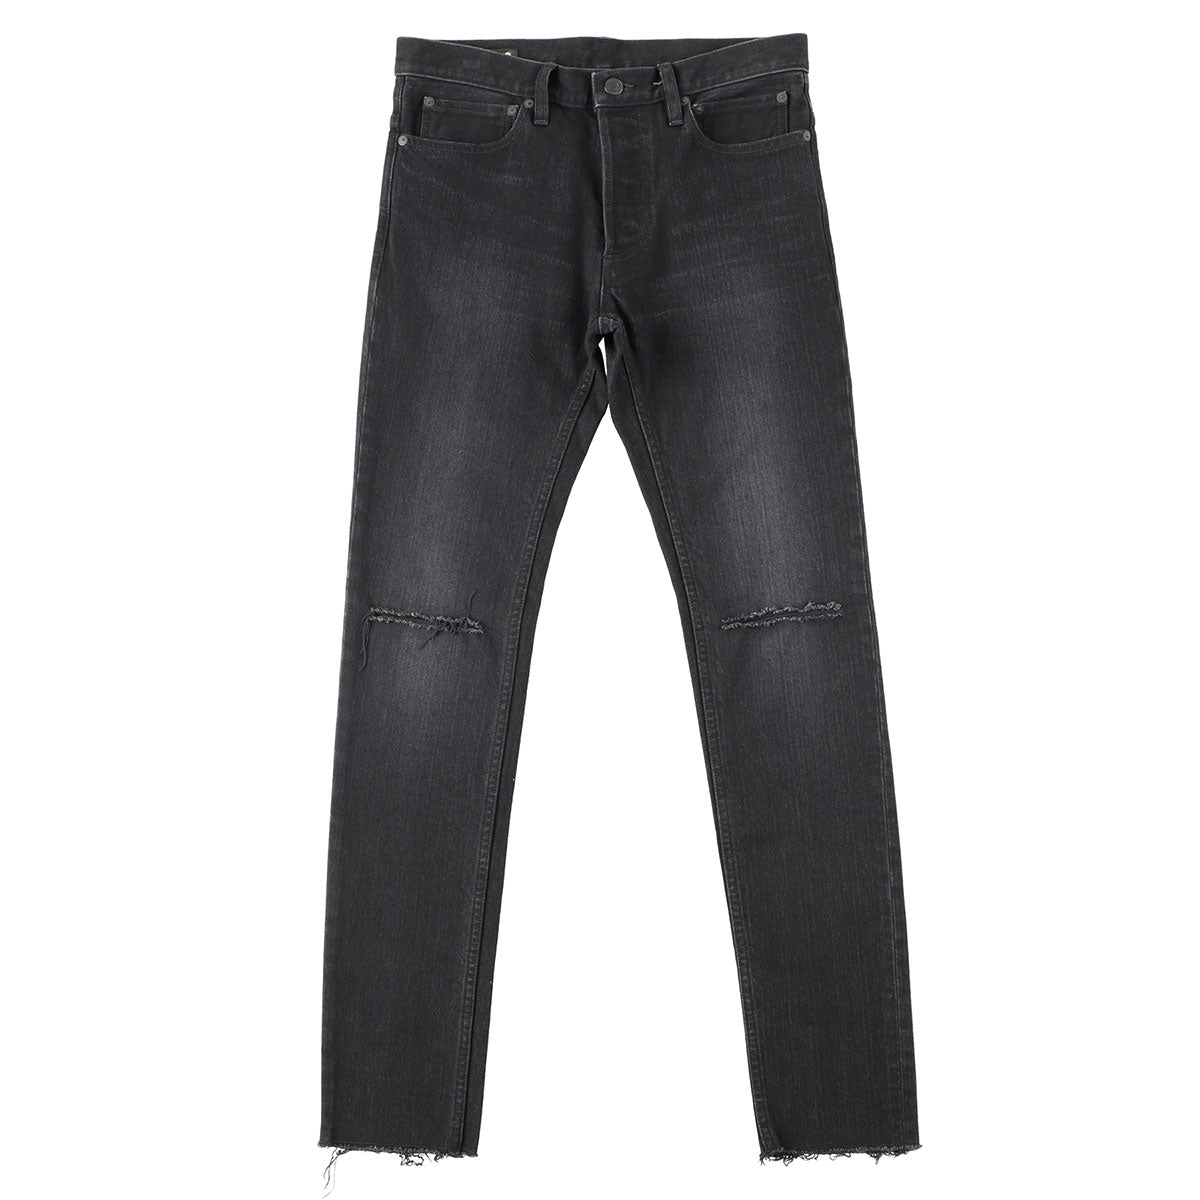 Stretch Slim Tapered Knee Slit 6 Pocket Jean. - Why are you here?